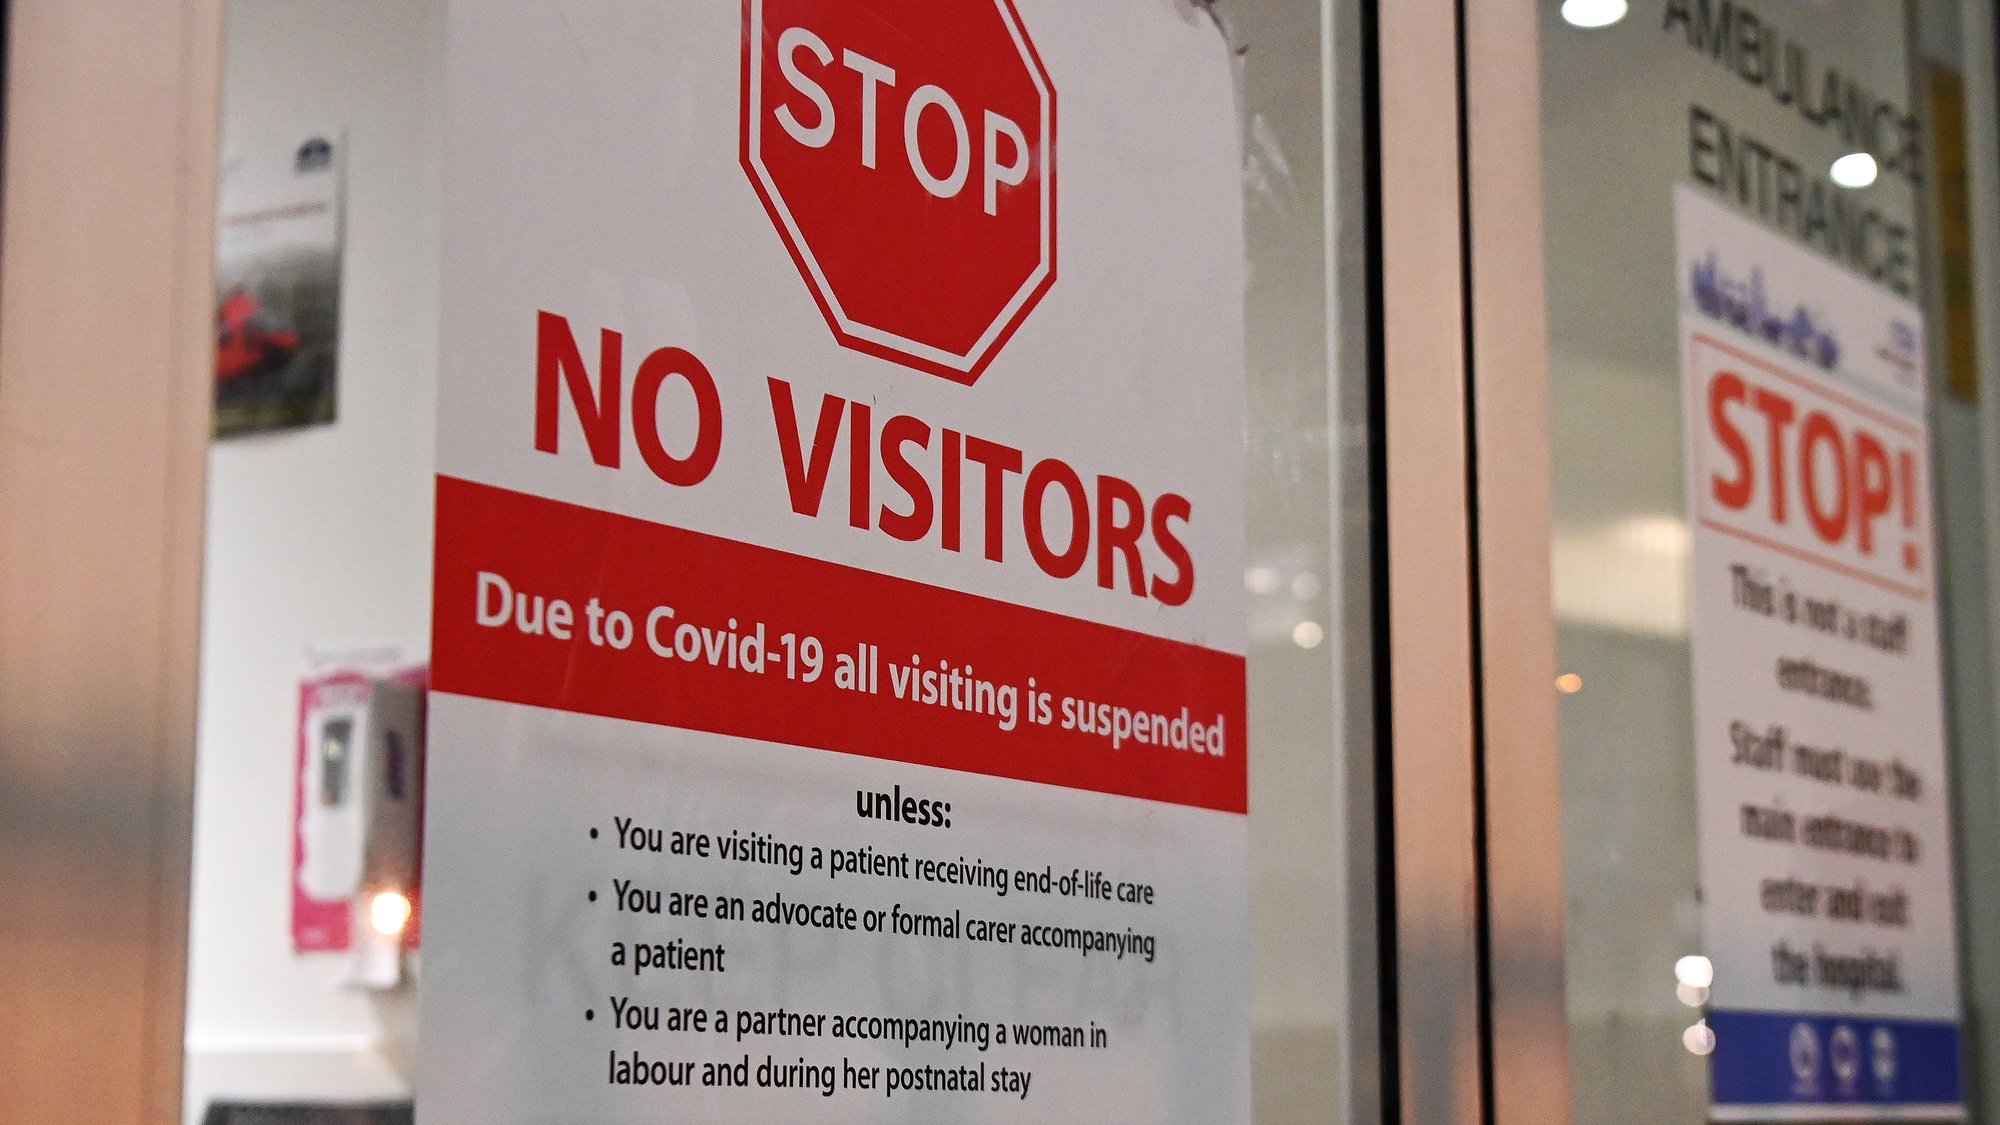 epa08934253 A public notice restricts visitors due to COVID-19 at the Royal London hospital in London, Britain, 13 January 2021. Britain&#039;s national health service (NHS) is coming under sever pressure as COVID-19 disease related hospital admissions continue to rise across the UK.  EPA/ANDY RAIN